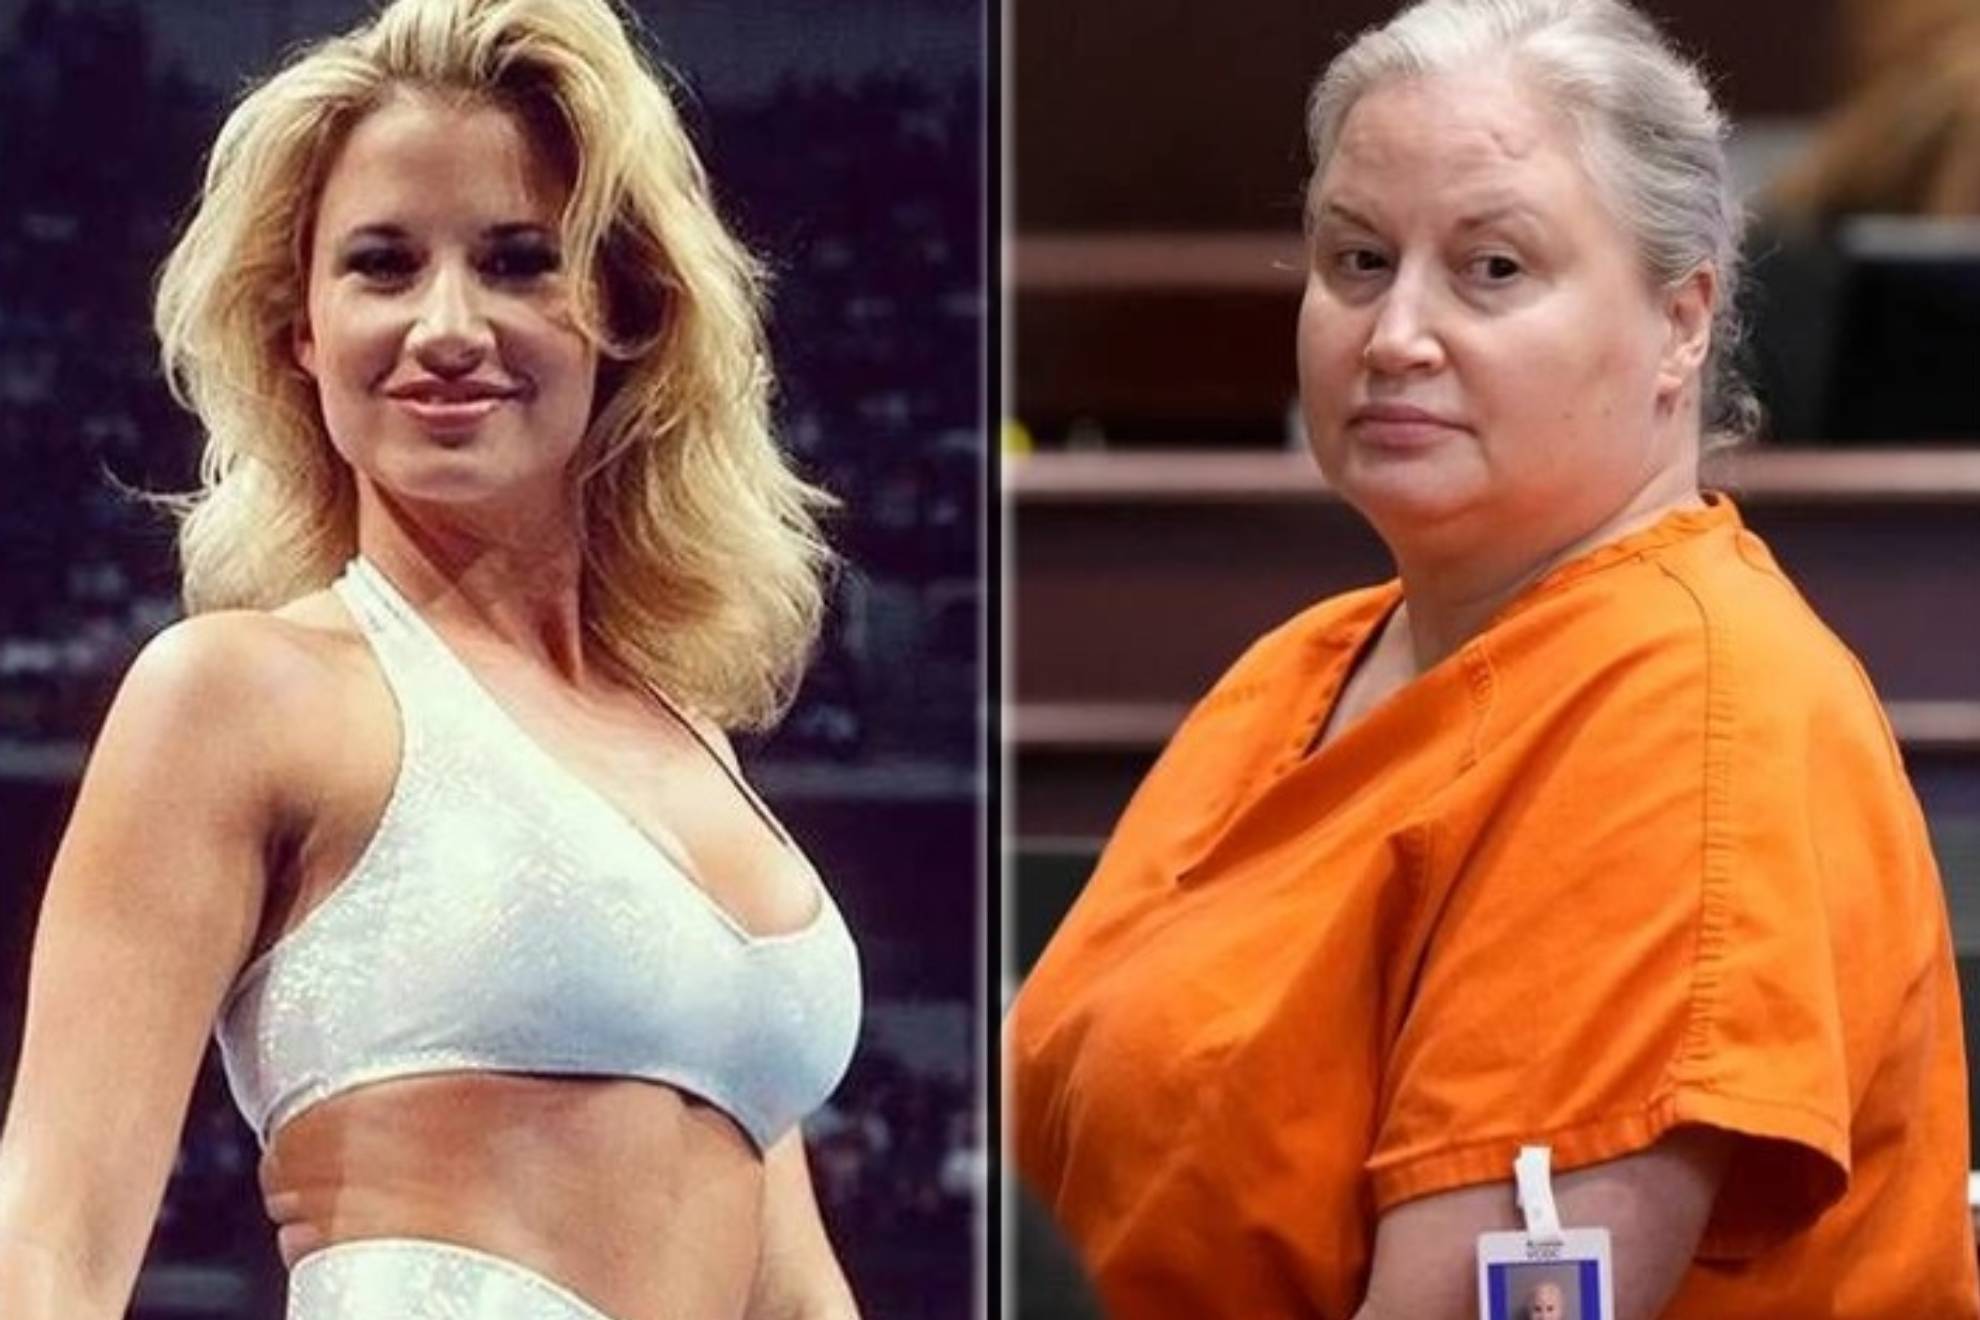 Tammy 'Sunny' Sytch has been declared "a danger to society", marking the fall of the WWE Diva